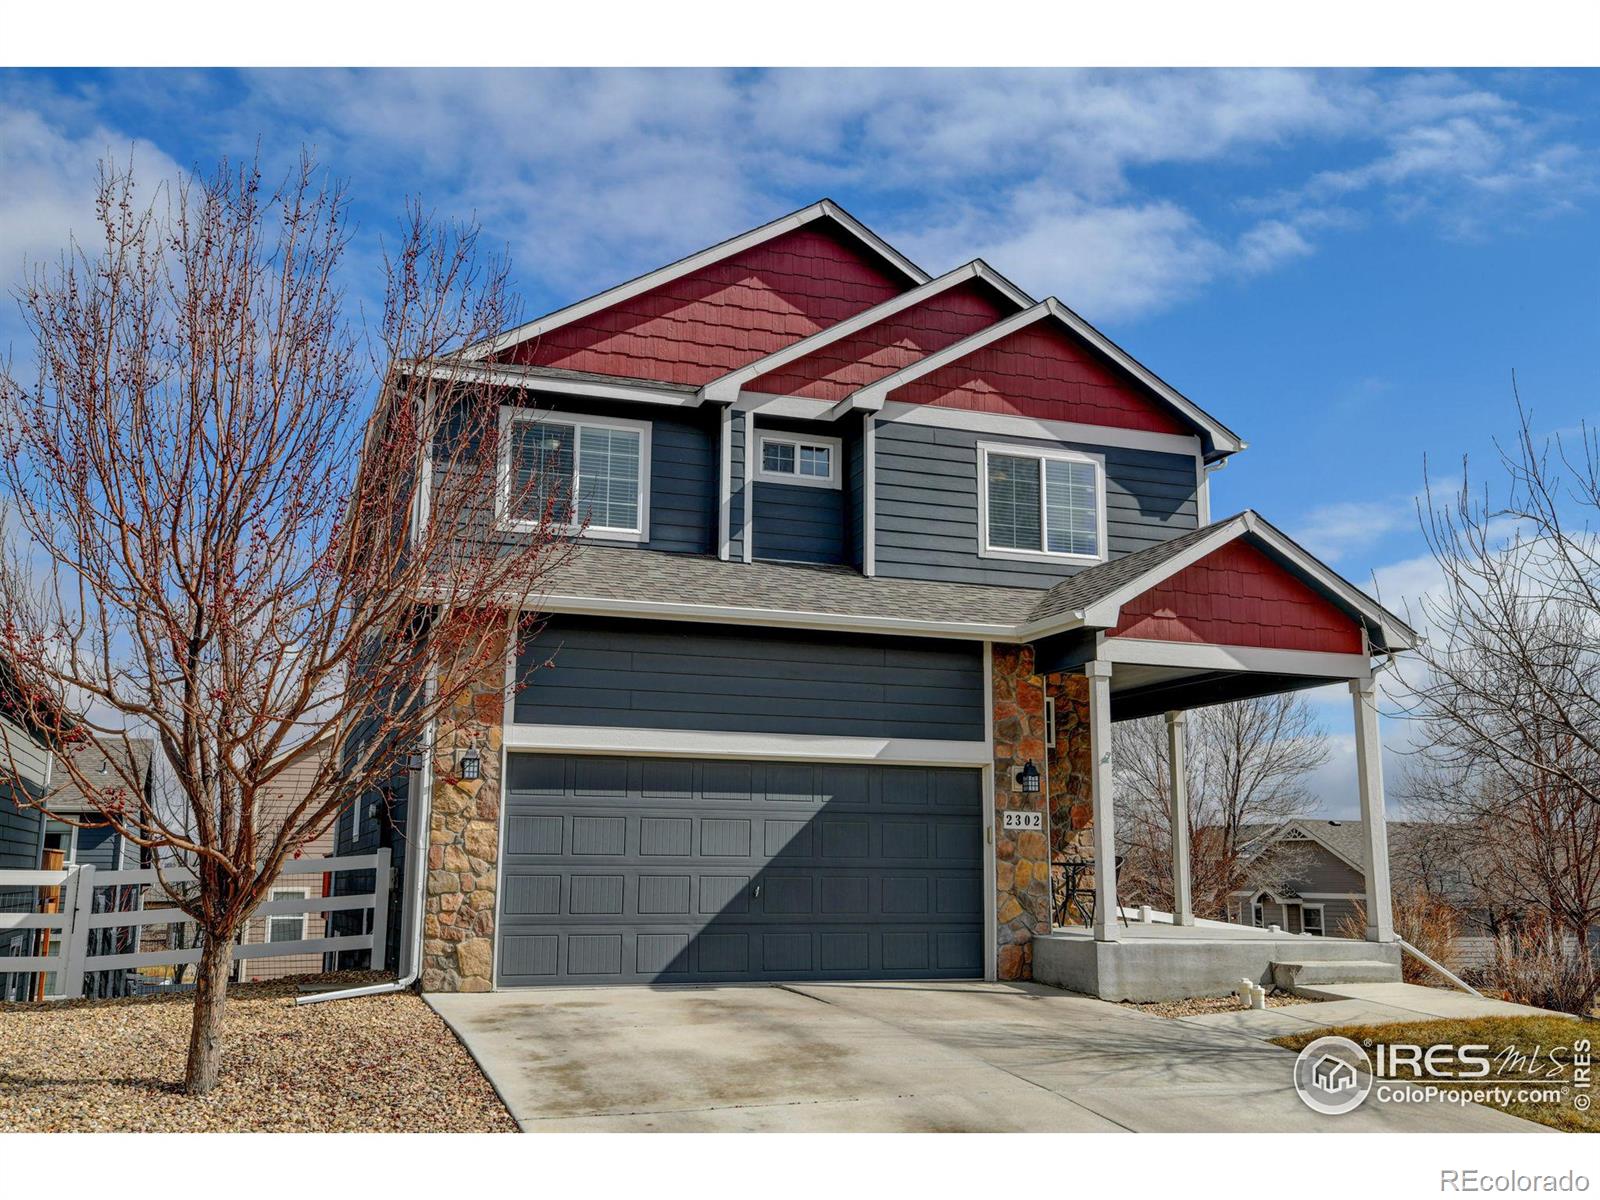 Report Image for 2302  Marshfield Lane,Fort Collins, Colorado